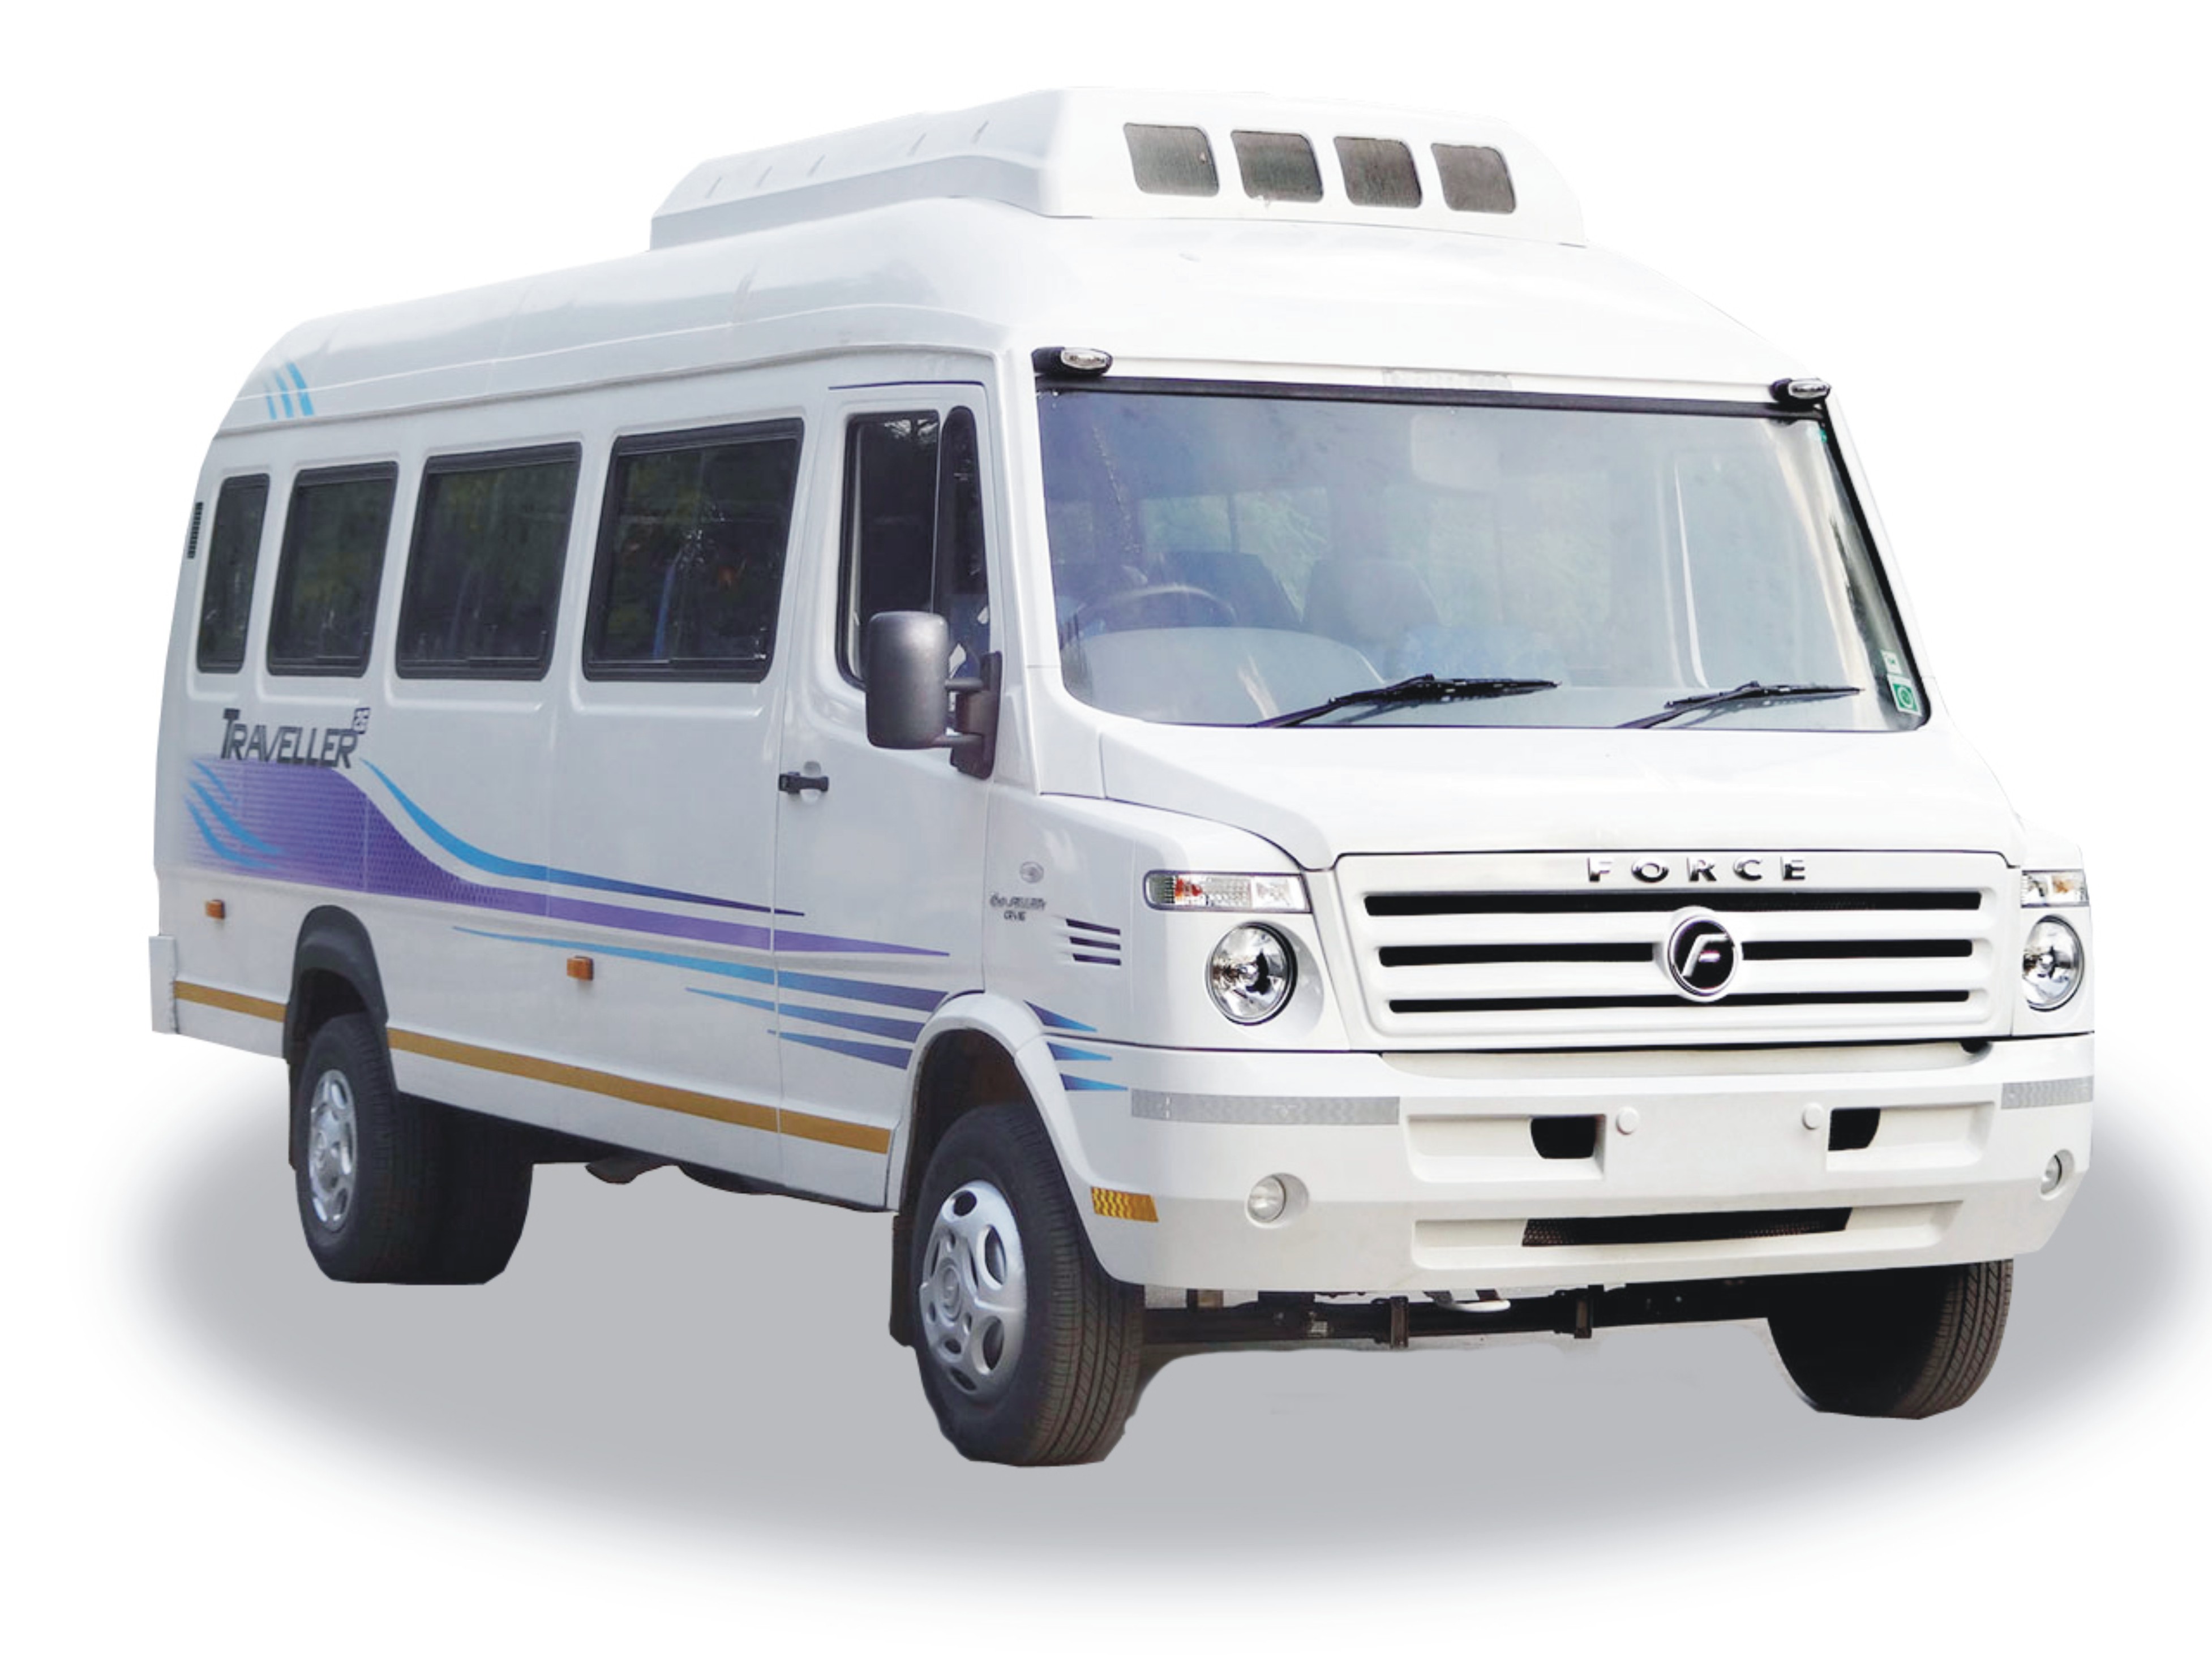 force tempo traveller spare parts price list